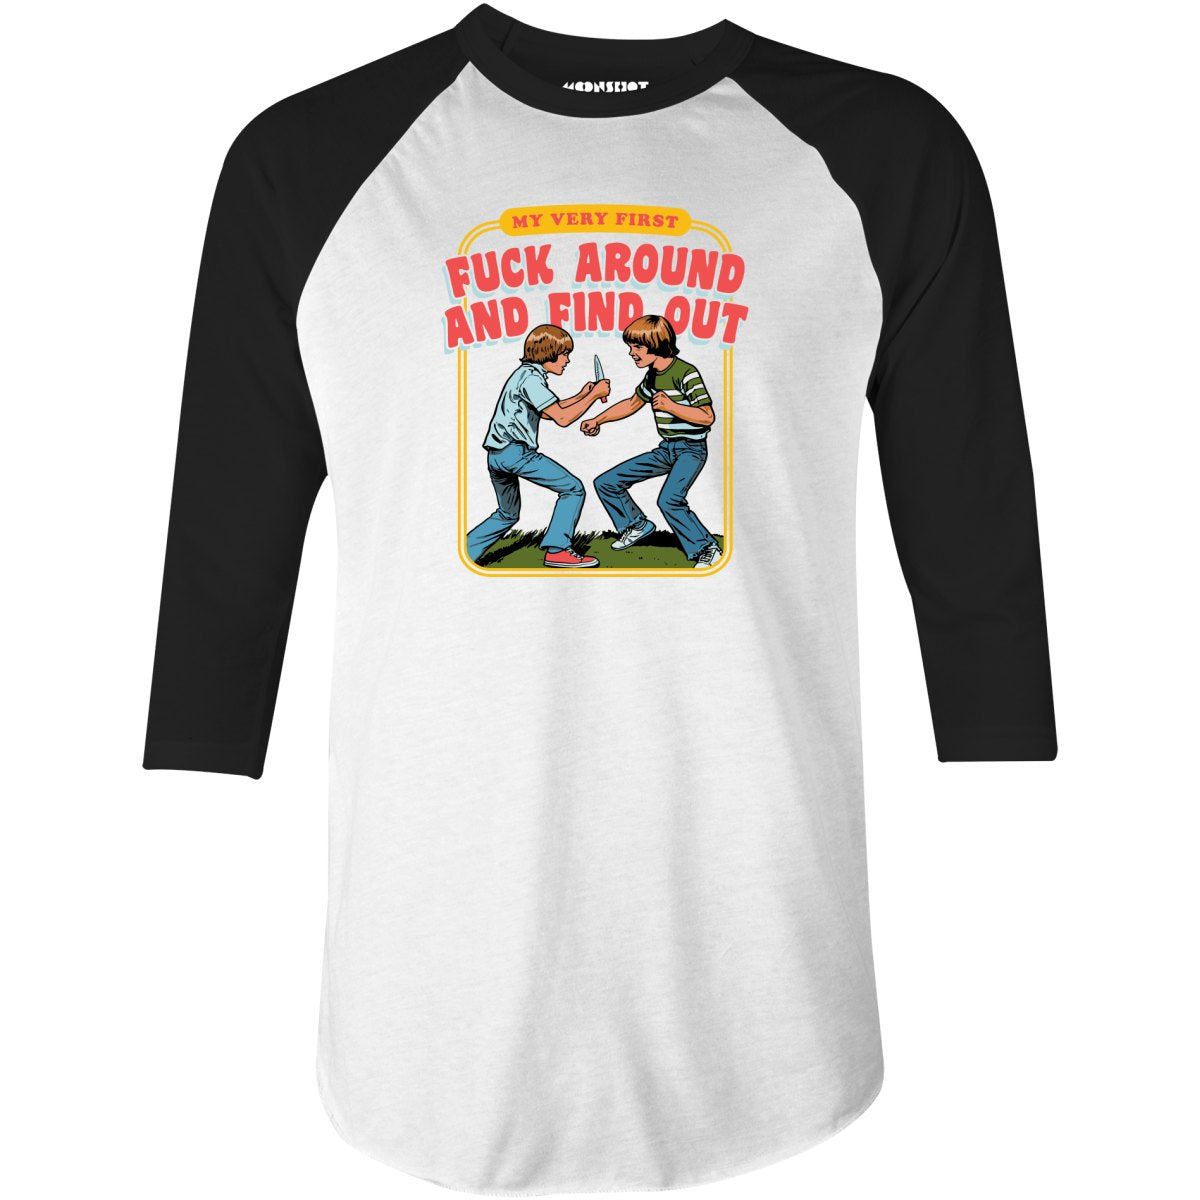 My Very First Fuck Around and Find Out - 3/4 Sleeve Raglan T-Shirt